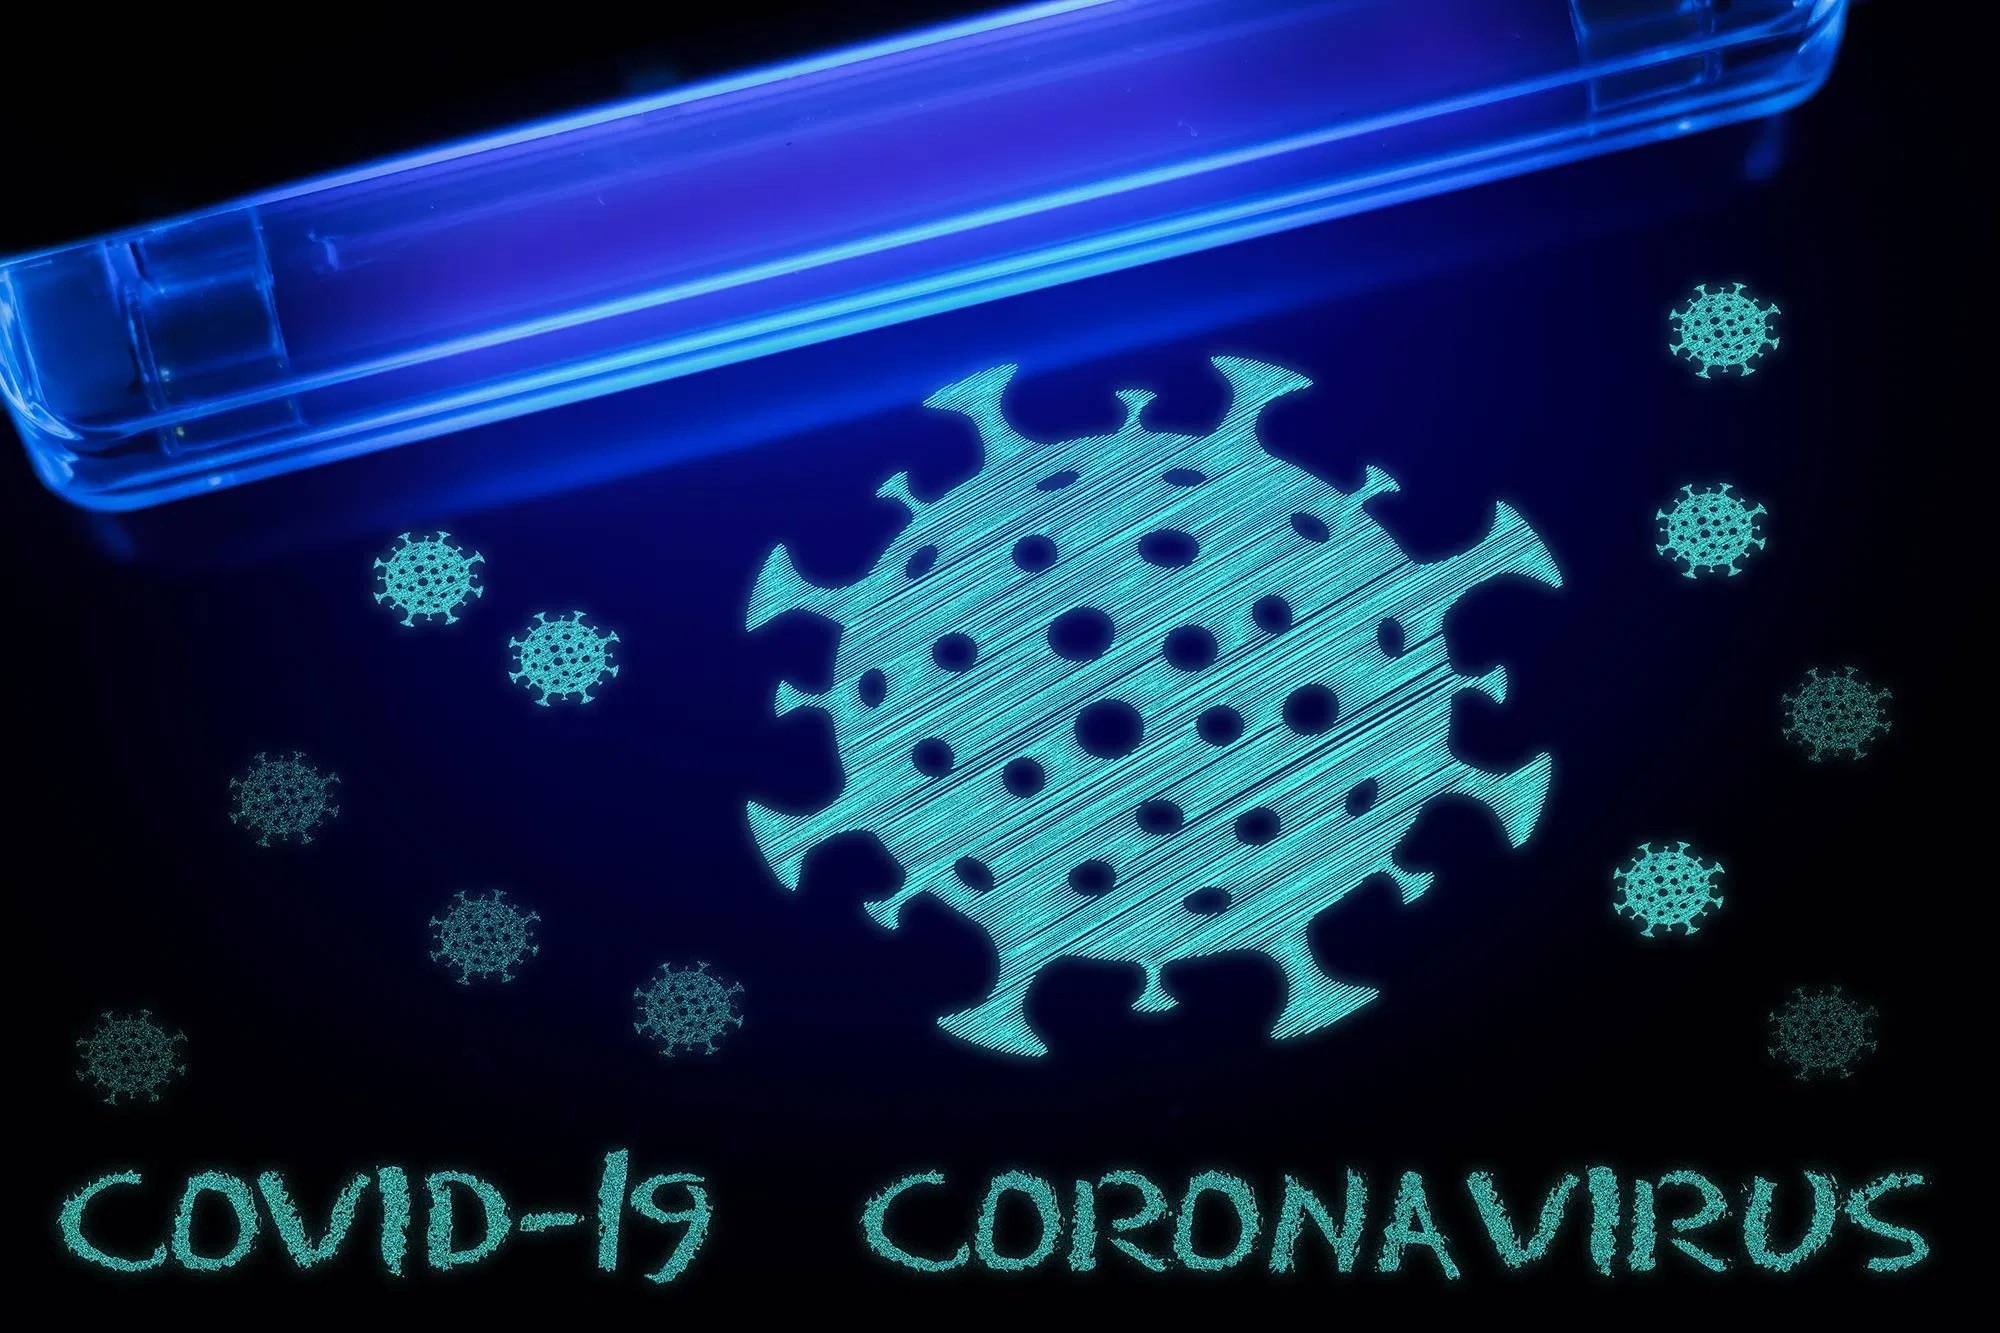 Using UV Light Sterilizer for Disinfection During Covid-19